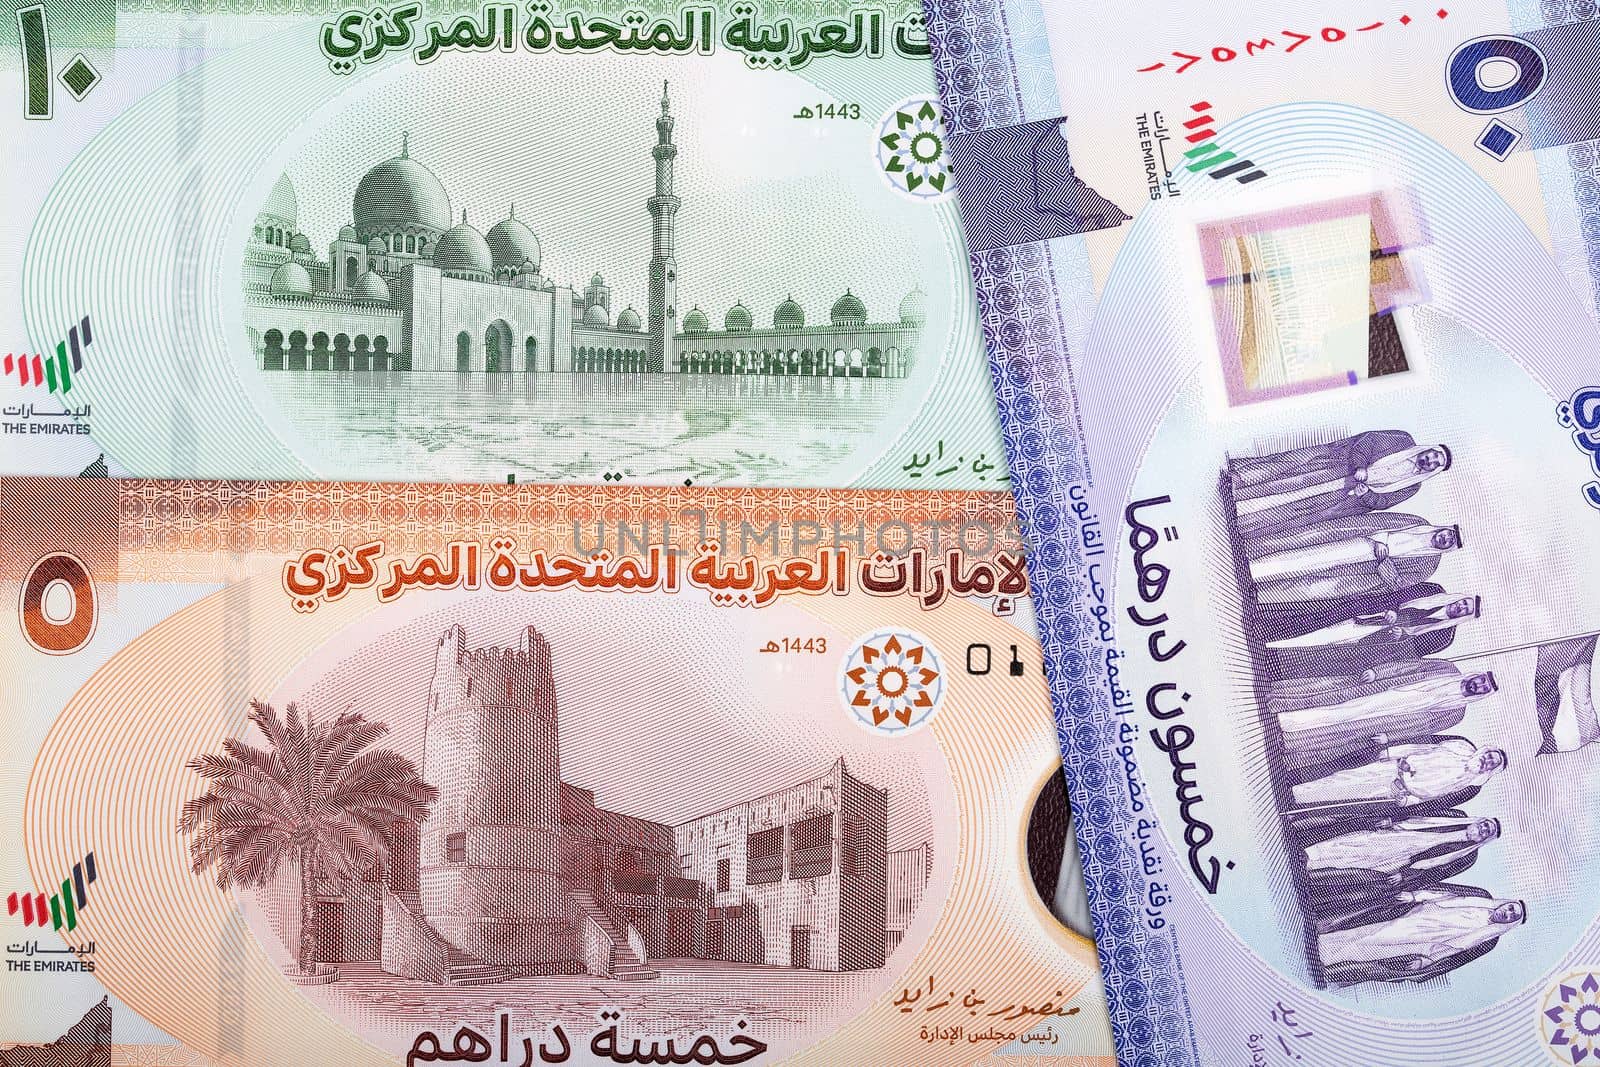 A new series of money from the United Arab Emirates - Dirhams